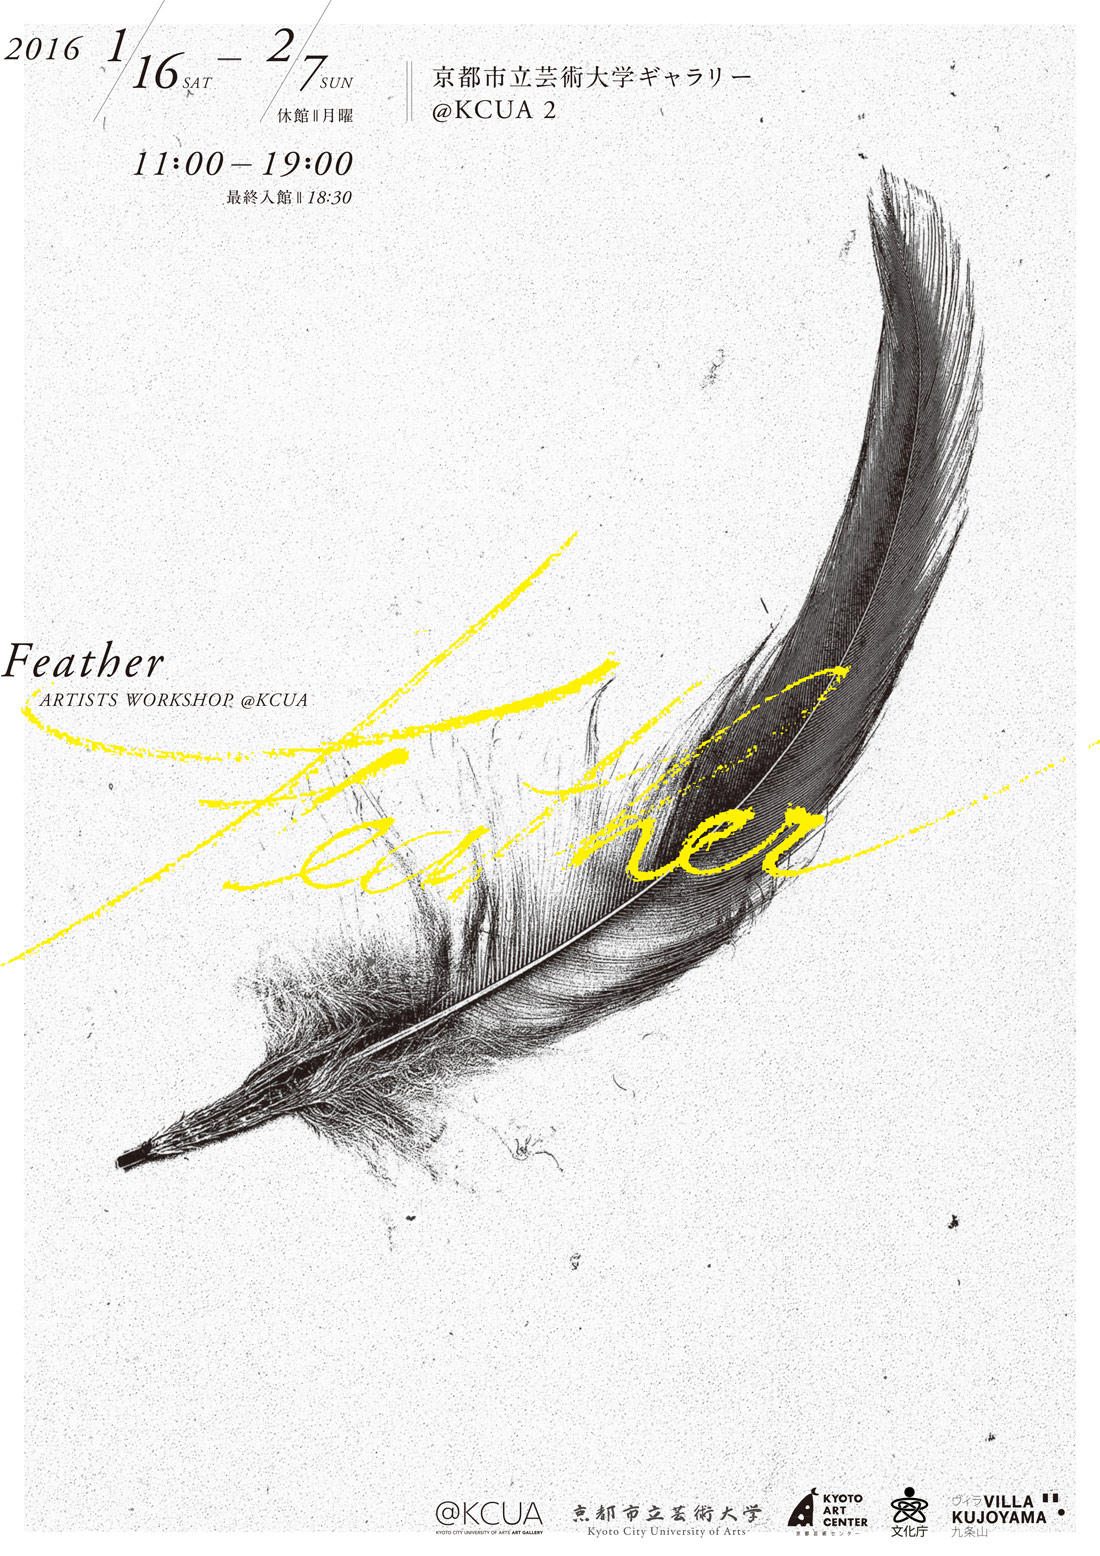 Feather - Affiche